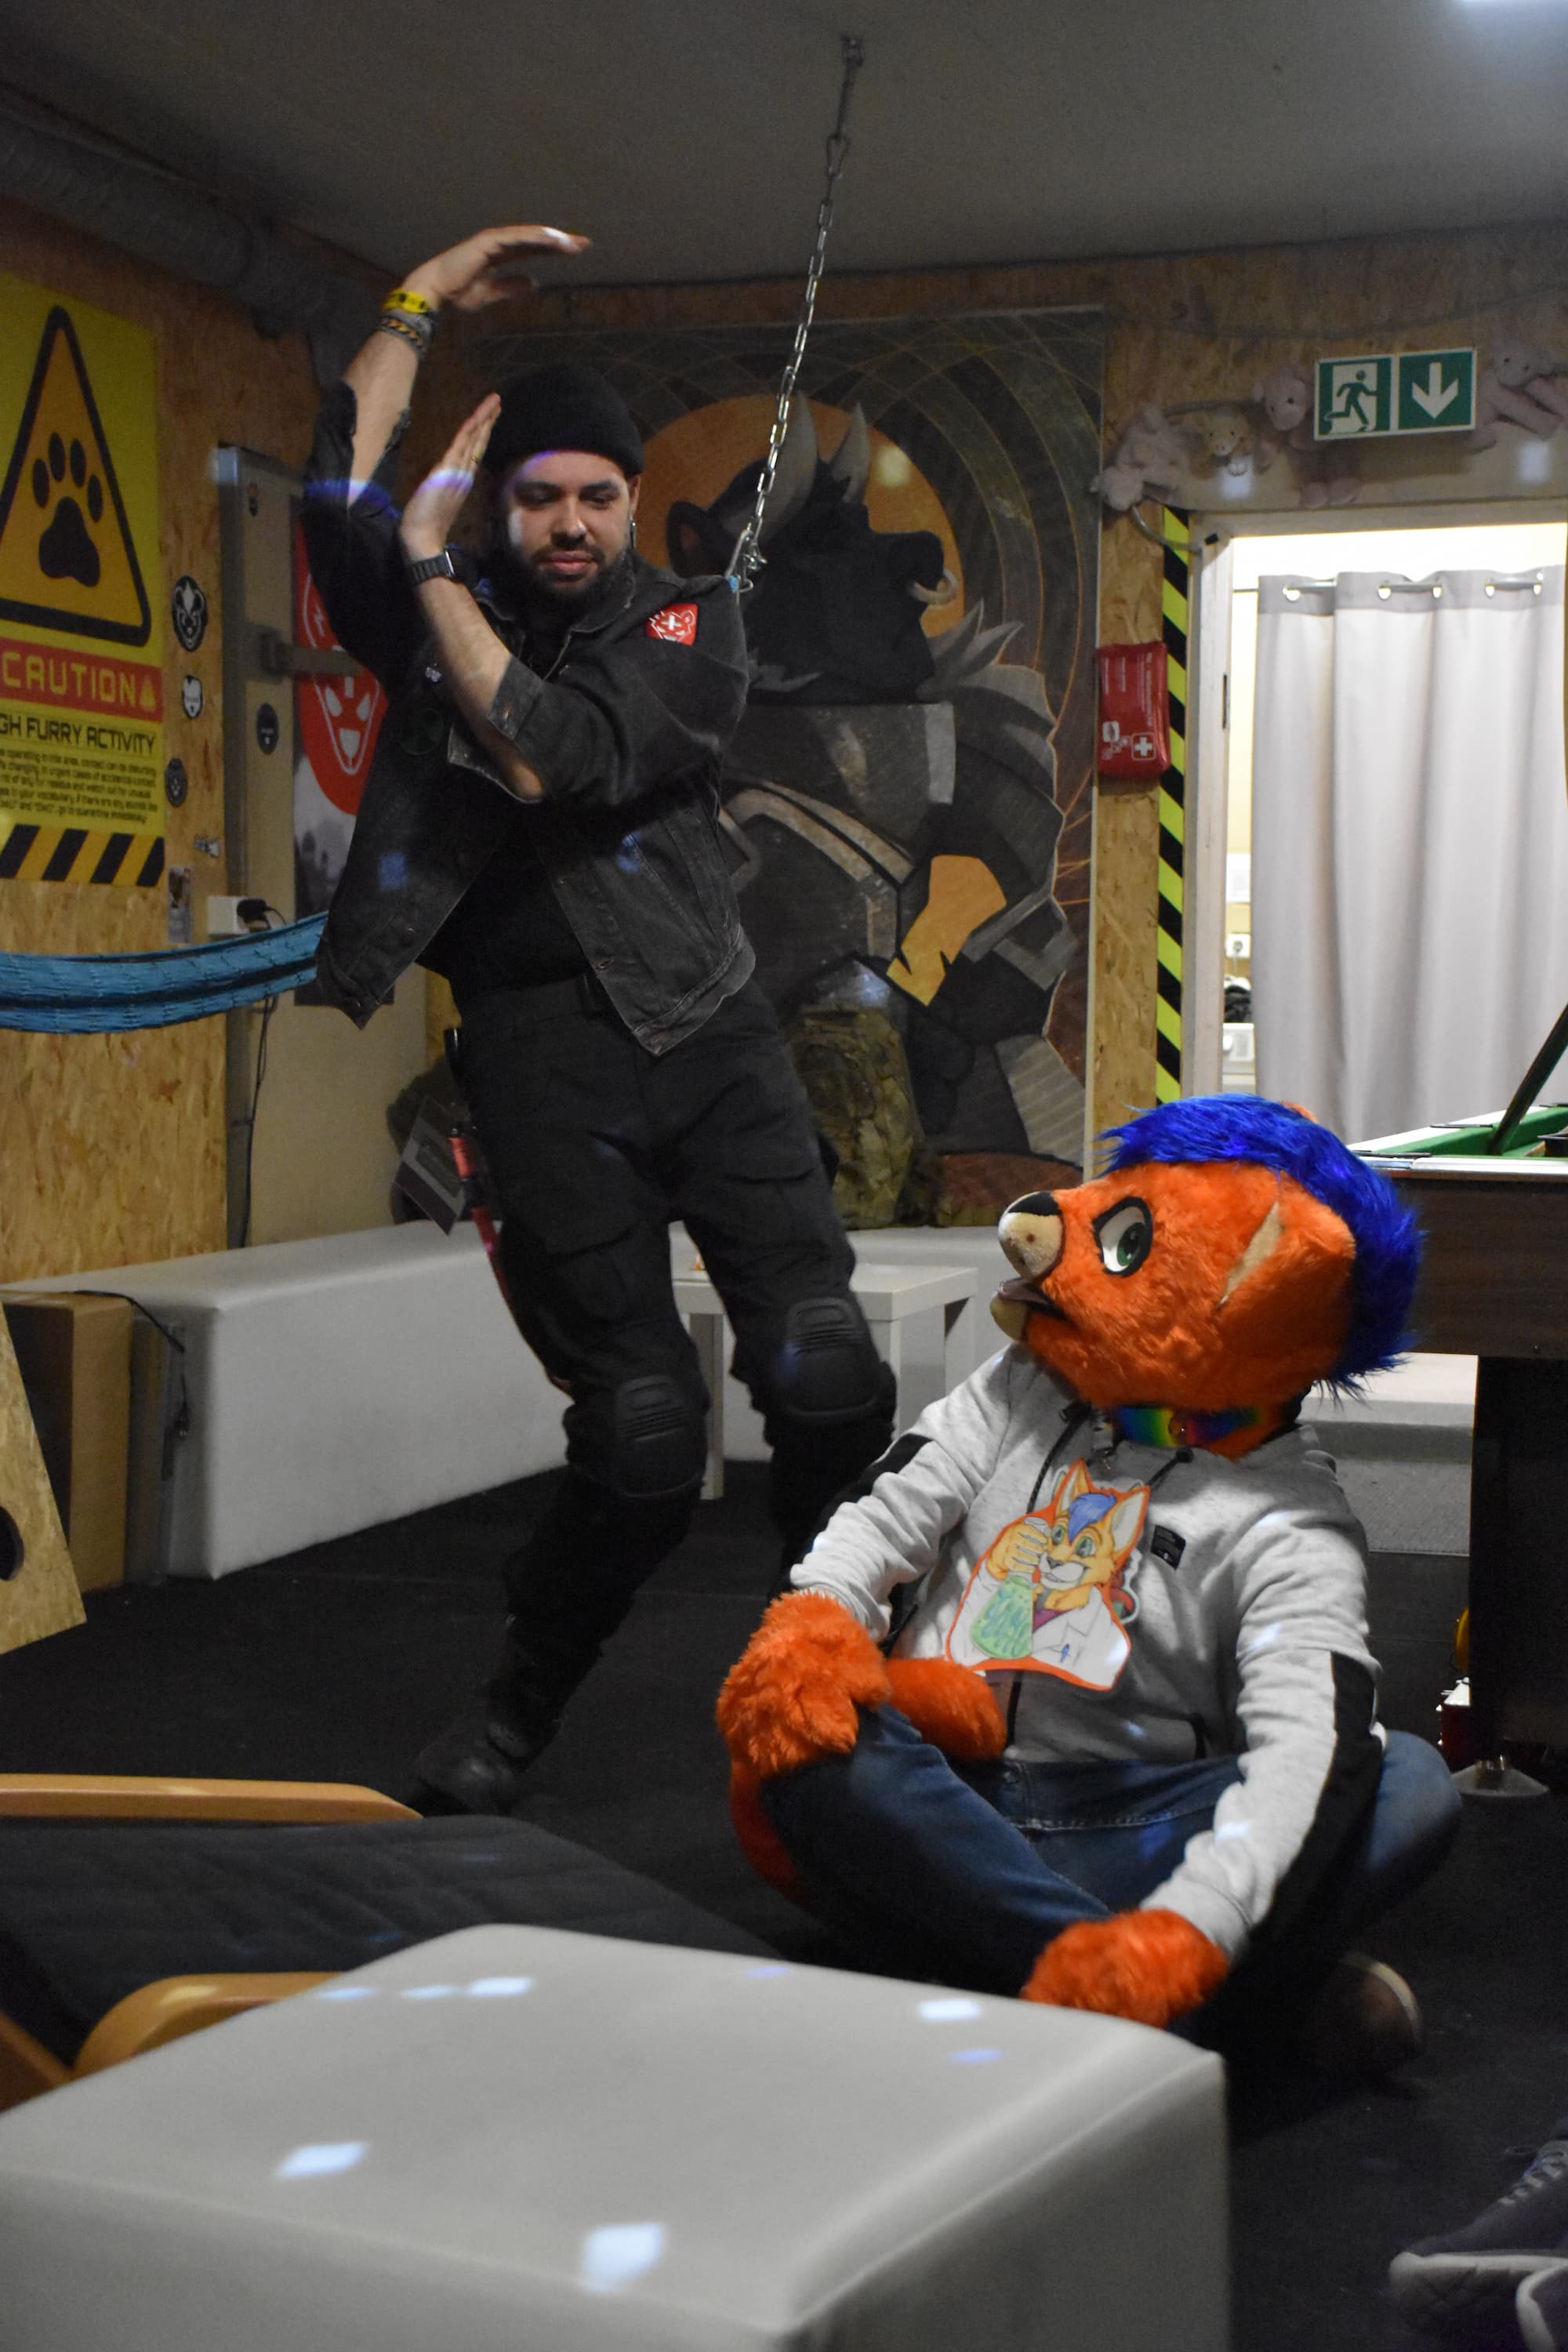 A man in black clothing dancing, caught doing a pose somewhat looking like an "S", a person in an orange cat fursuit is looking amazed at the performed dance.